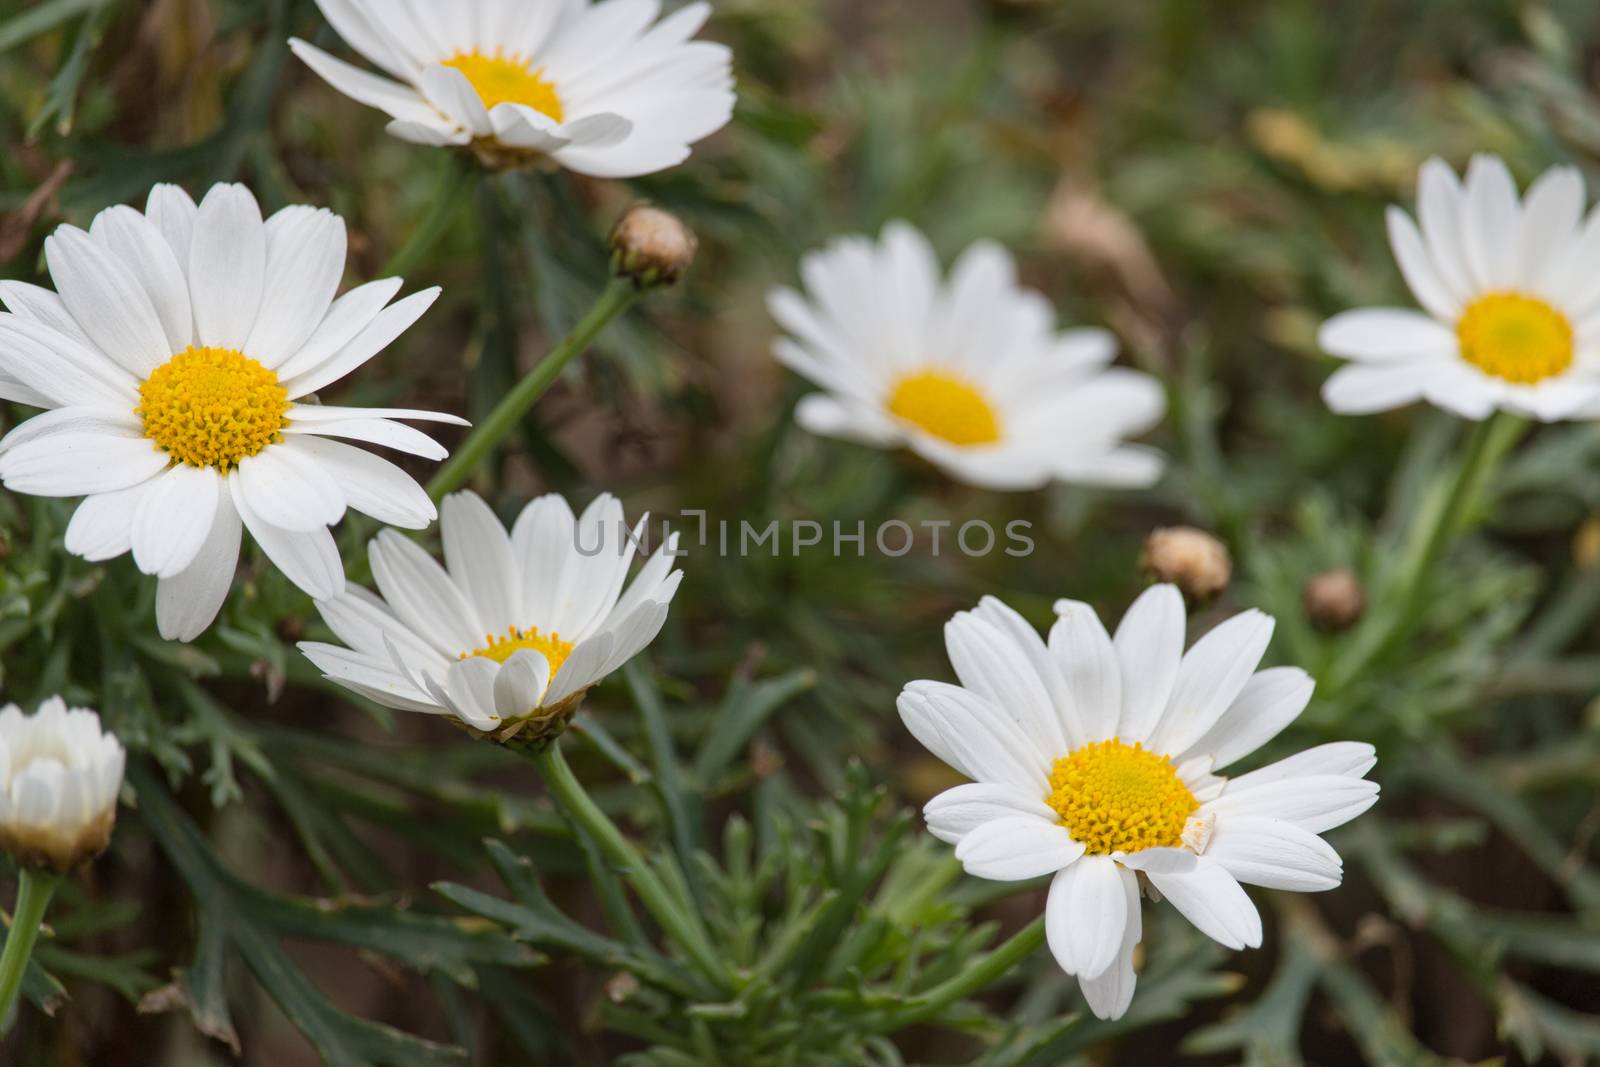 The white daises by alanstix64